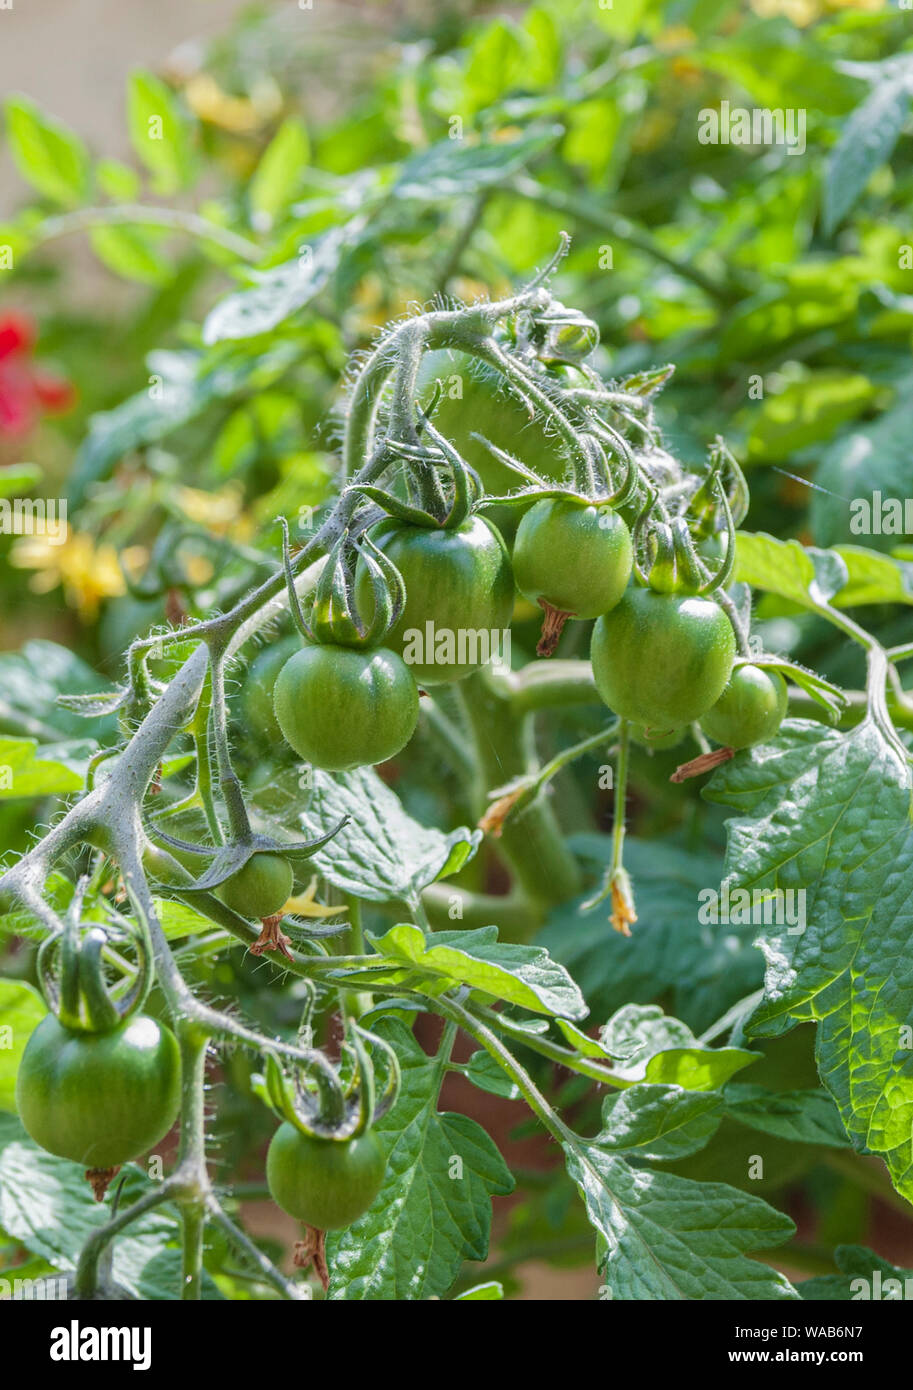 Tomatoes, Tumbling Toms (Solanum lycopersicum Tumbling Tom) growing in a hanging basket in a kitchen garden Stock Photo